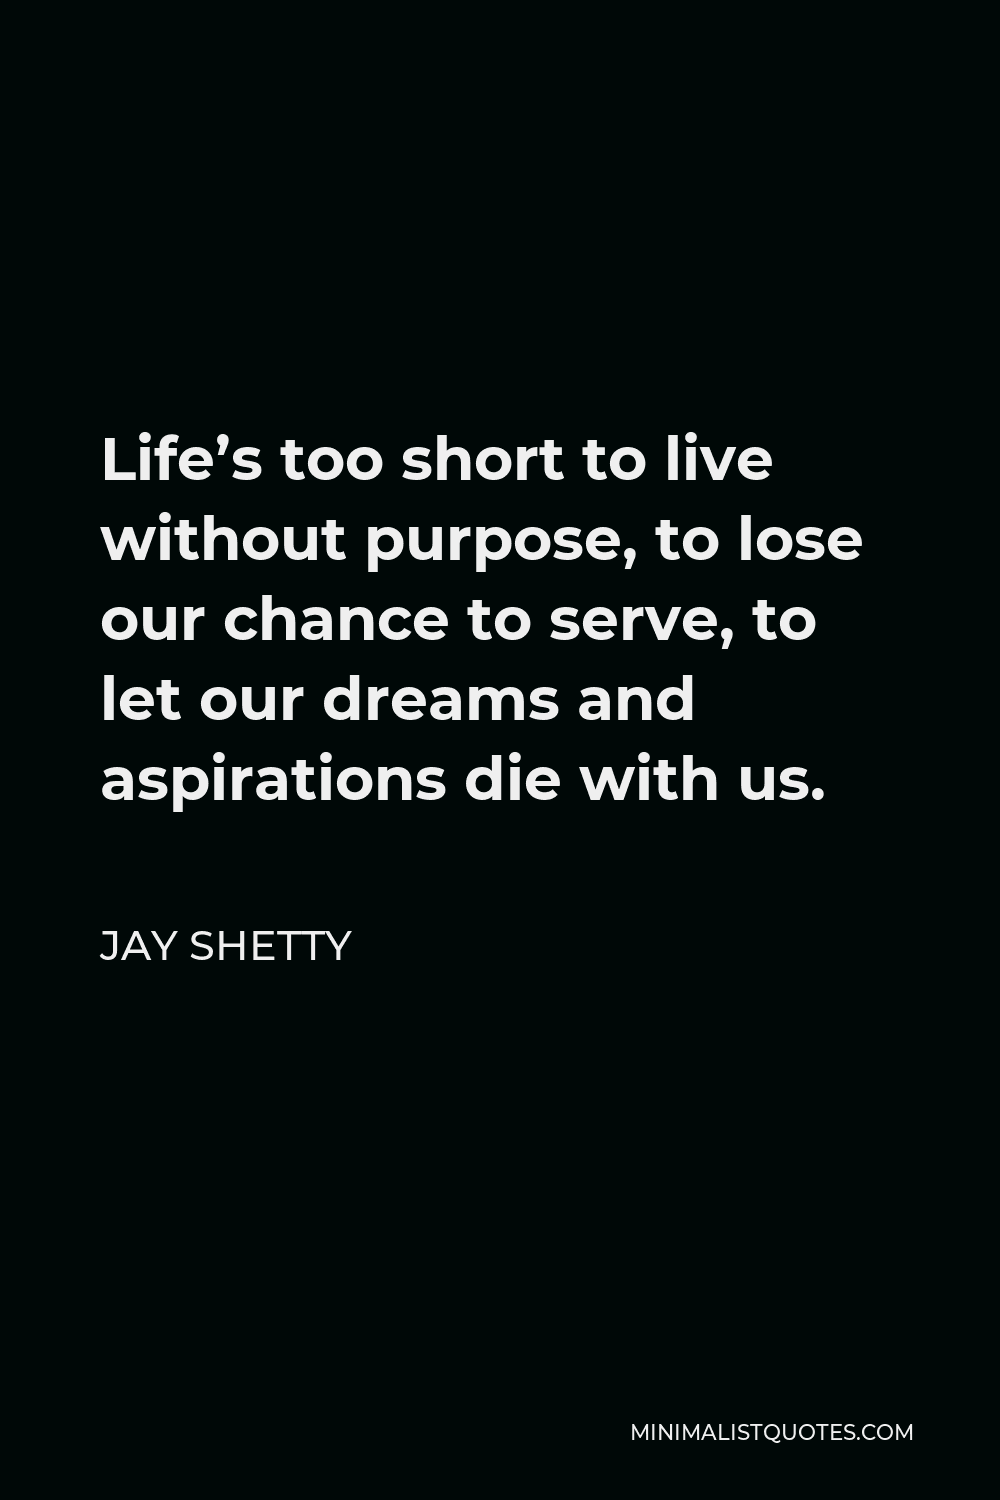 Jay Shetty Quote - Life’s too short to live without purpose, to lose our chance to serve, to let our dreams and aspirations die with us.